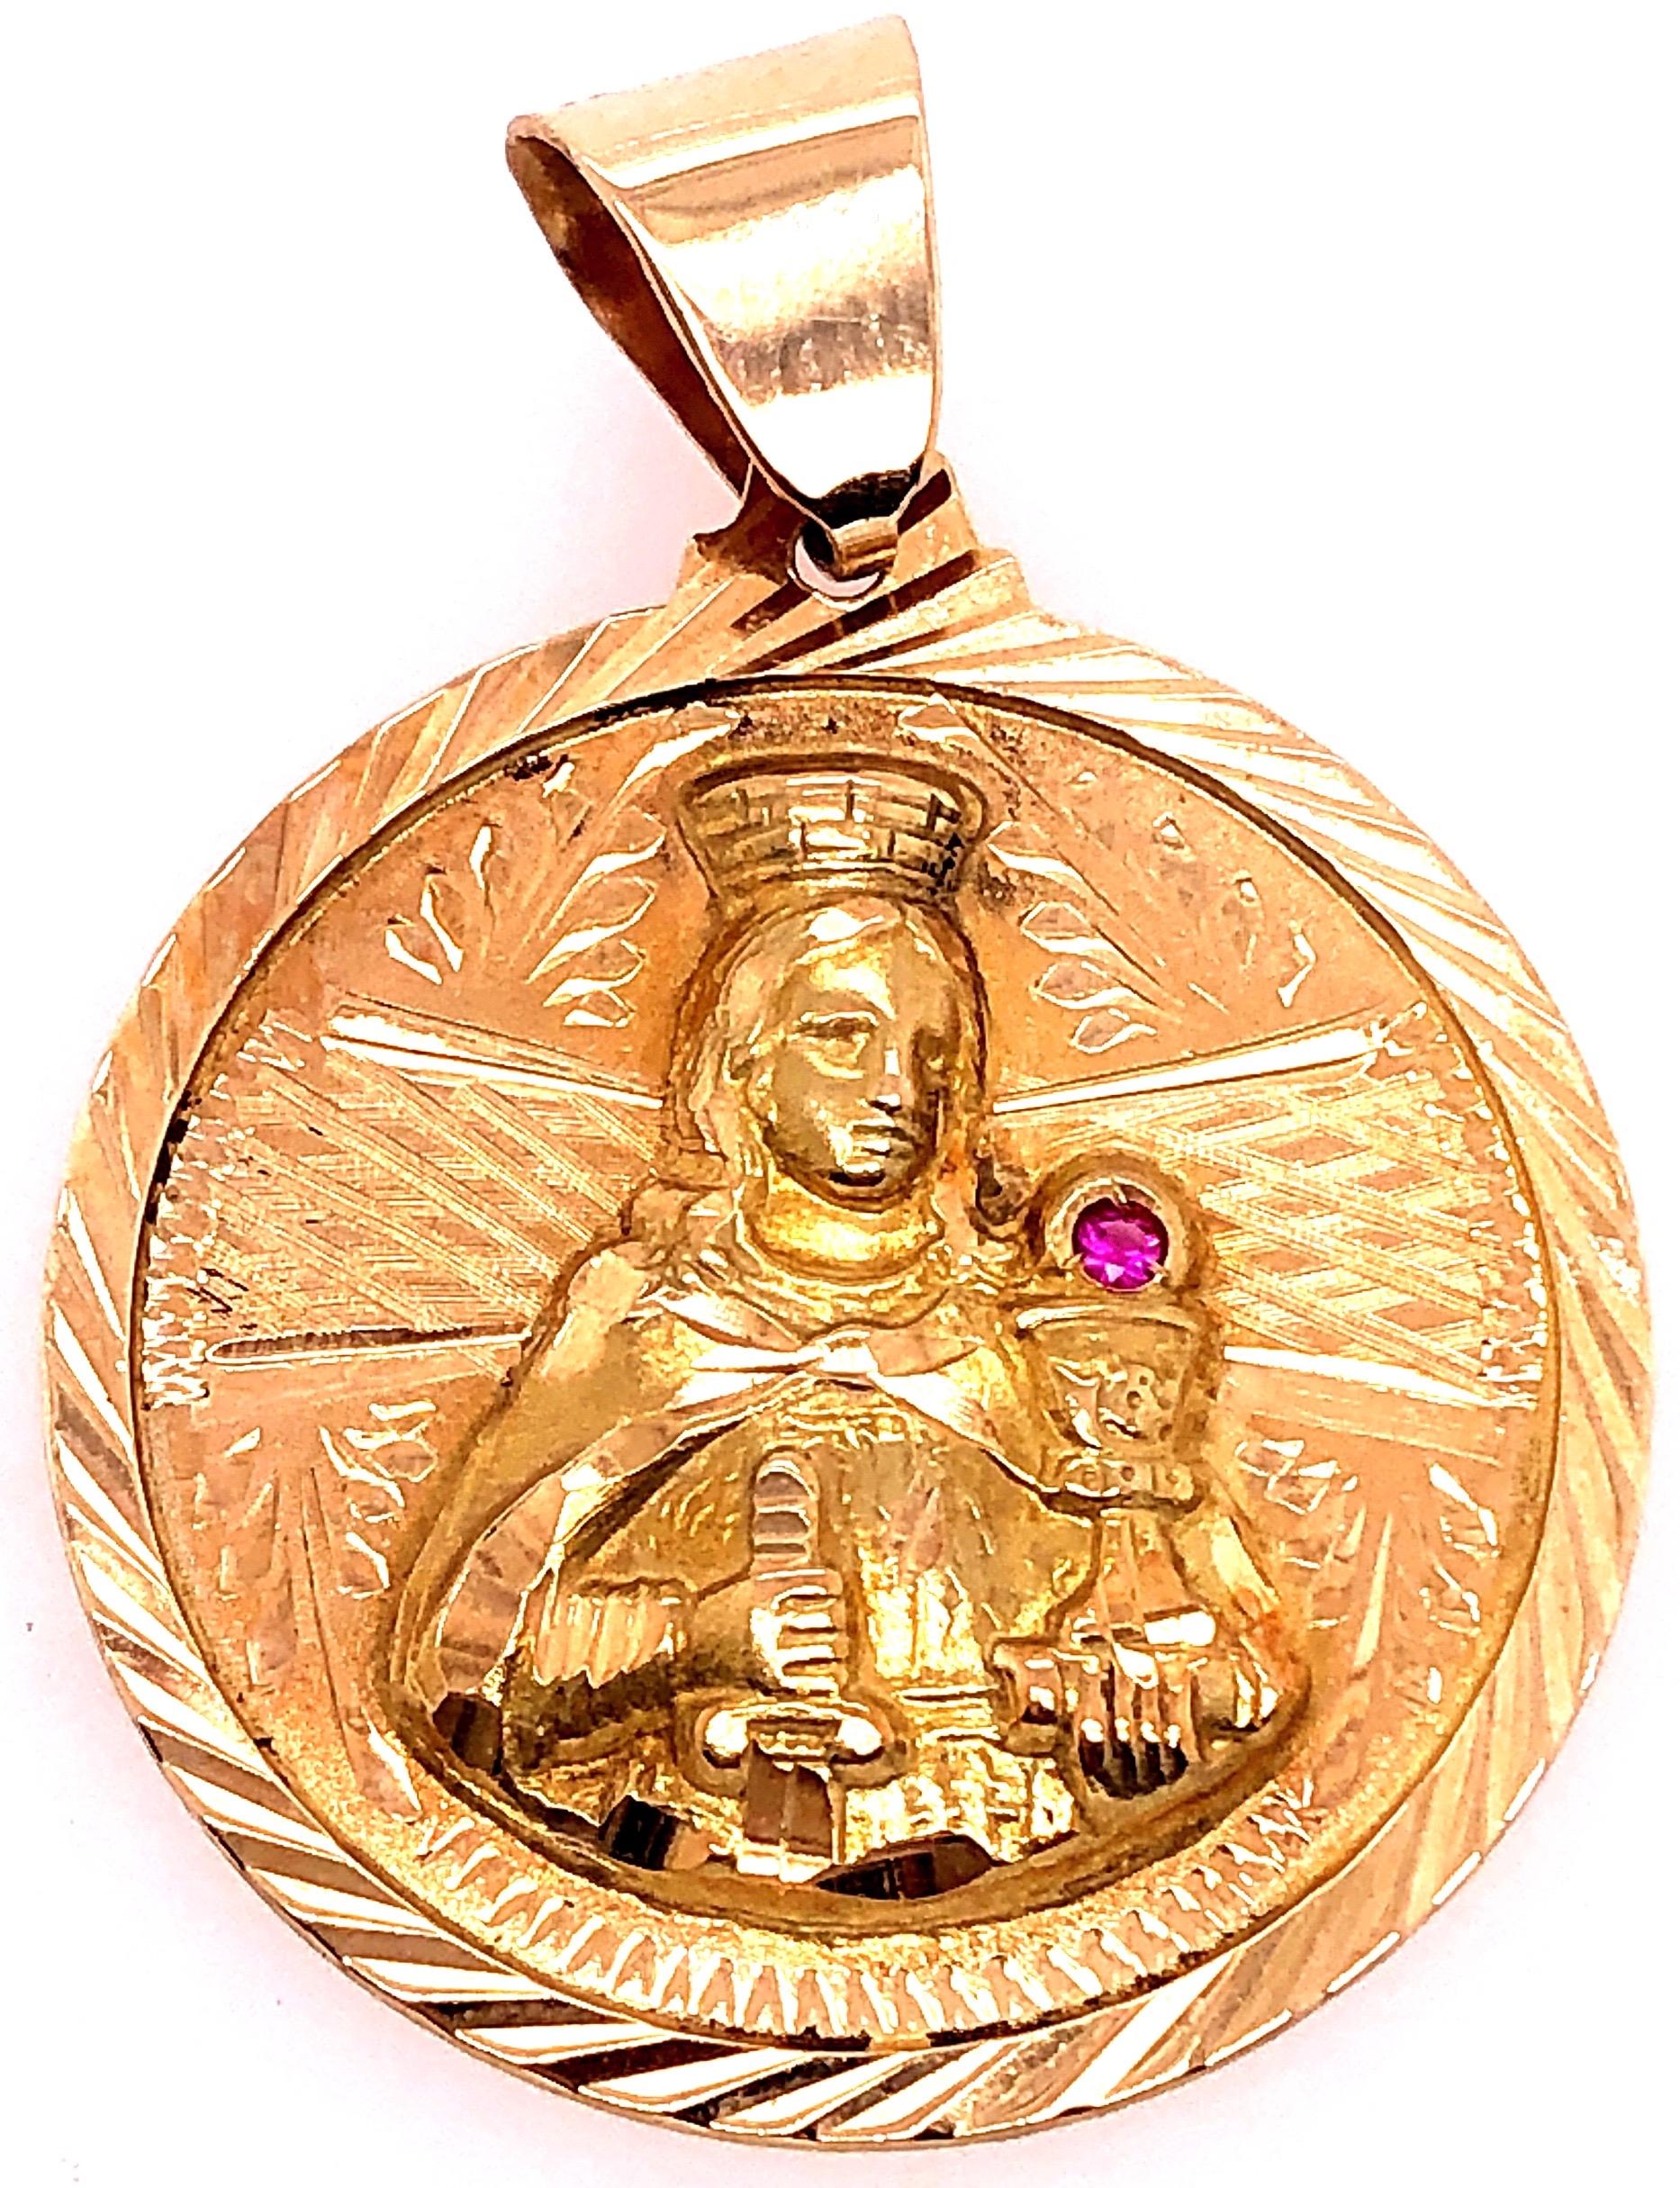 14 Karat Yellow Gold Religious Charm / Pendant with Ruby Accent
3.5 grams total weight
35.21 diameter